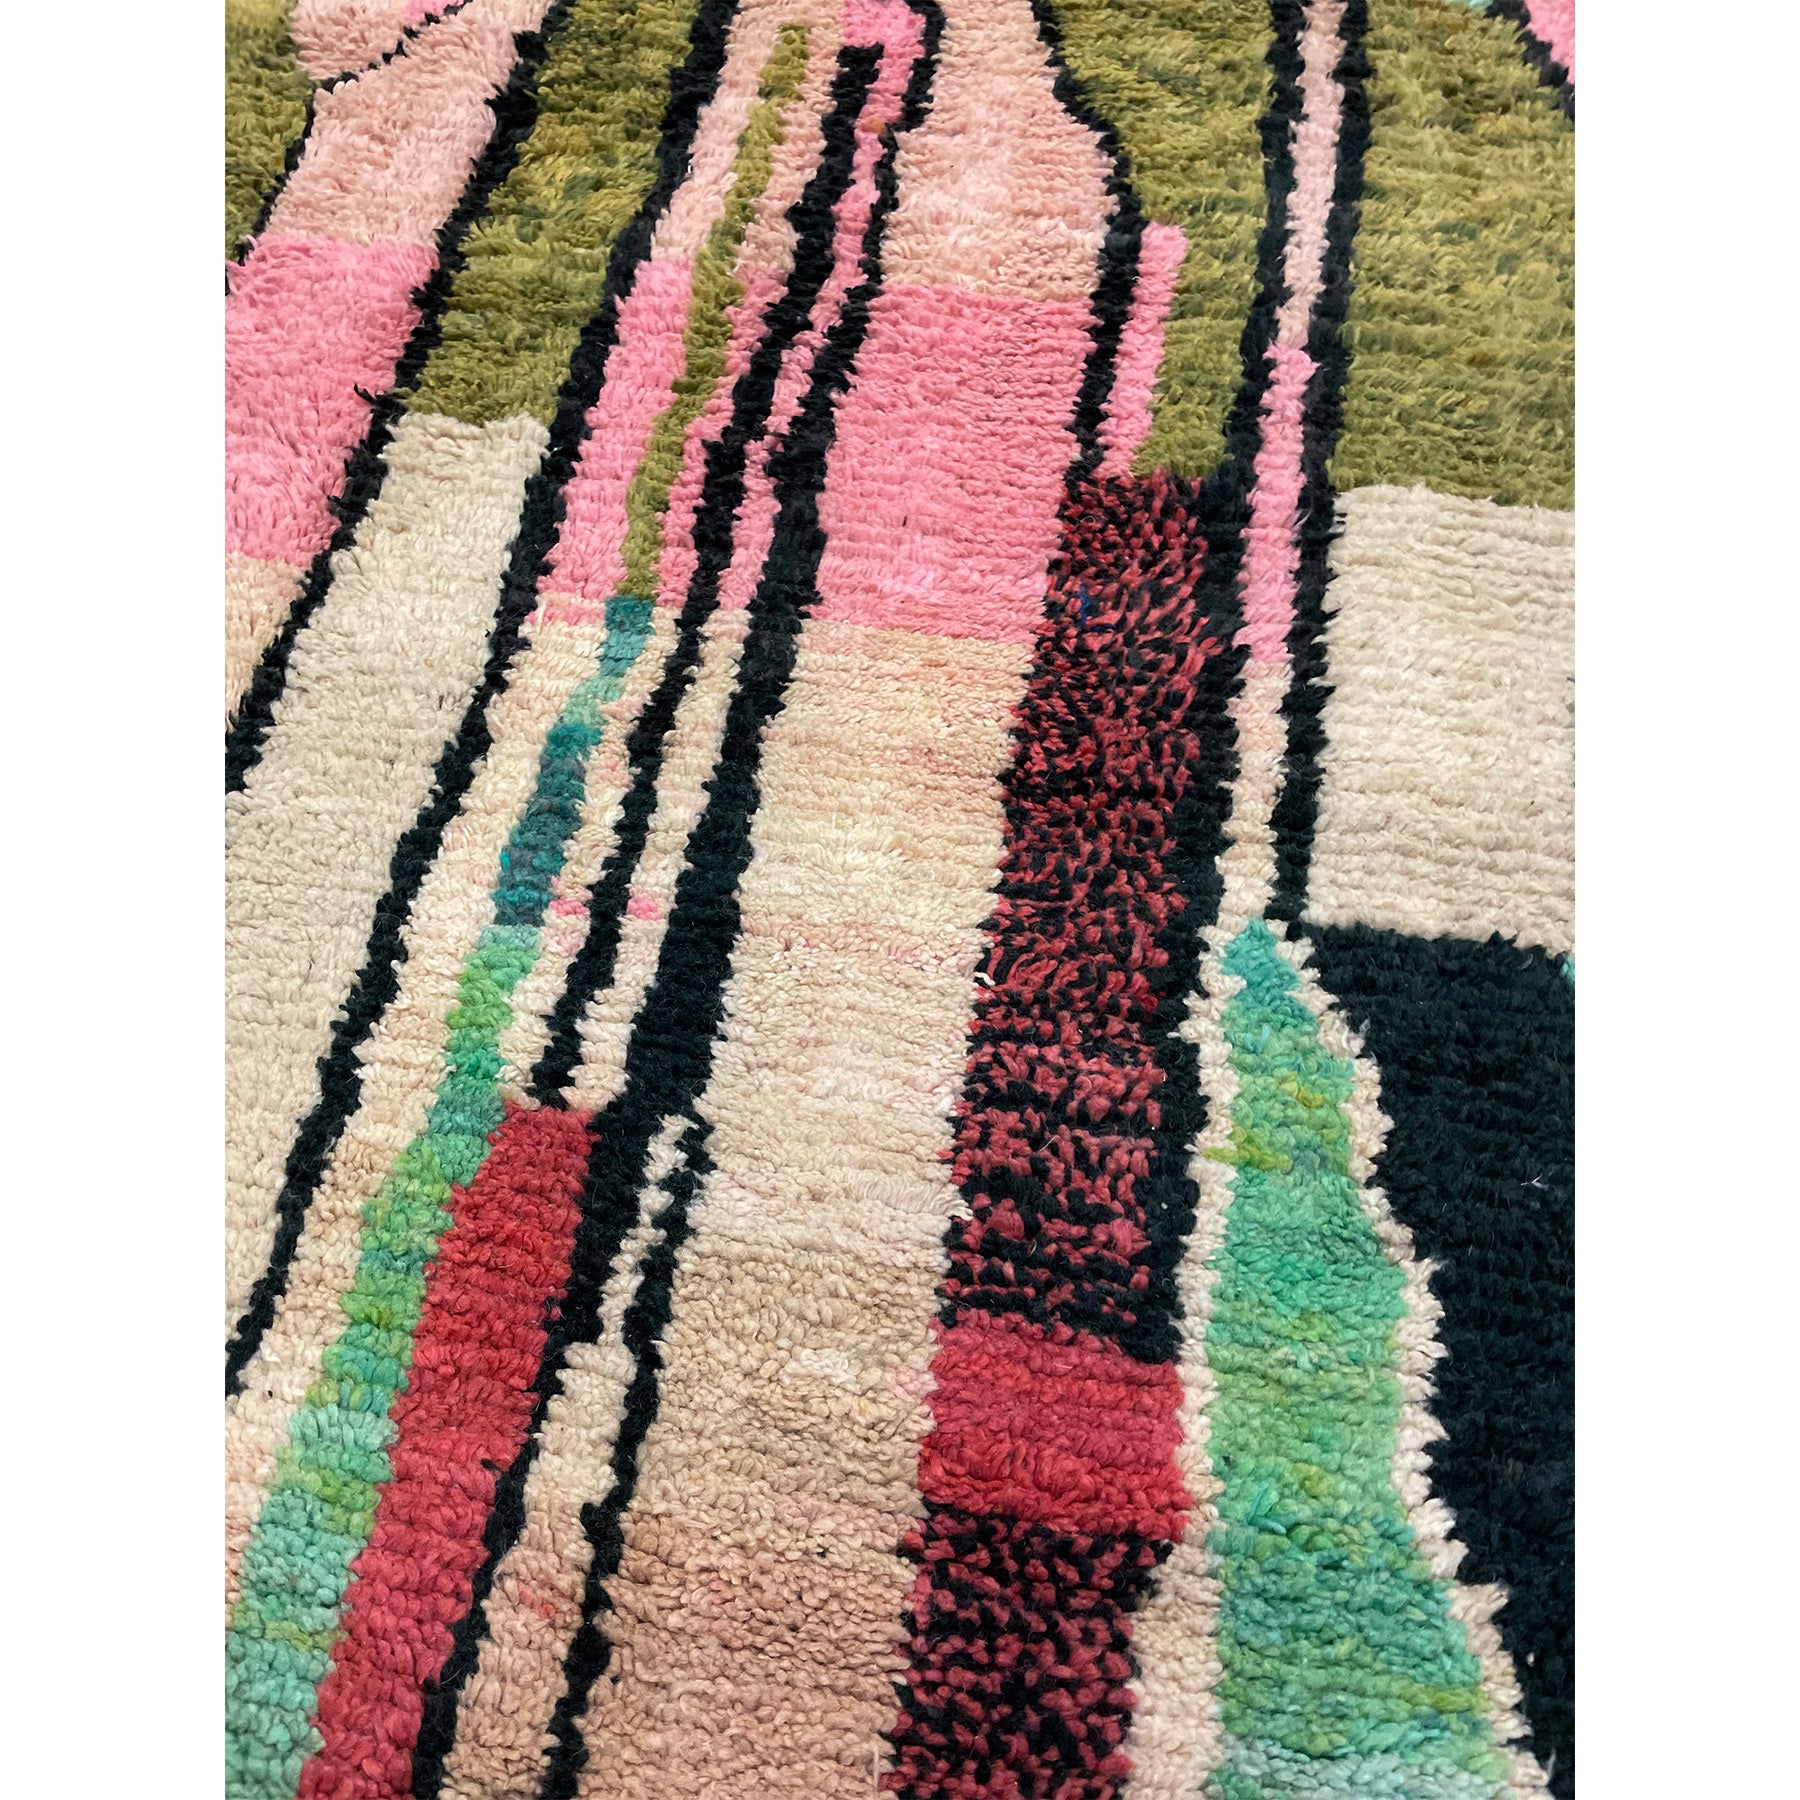 Boujaad style Moroccan rug with colorful, abstract design - Kantara | Moroccan Rugs